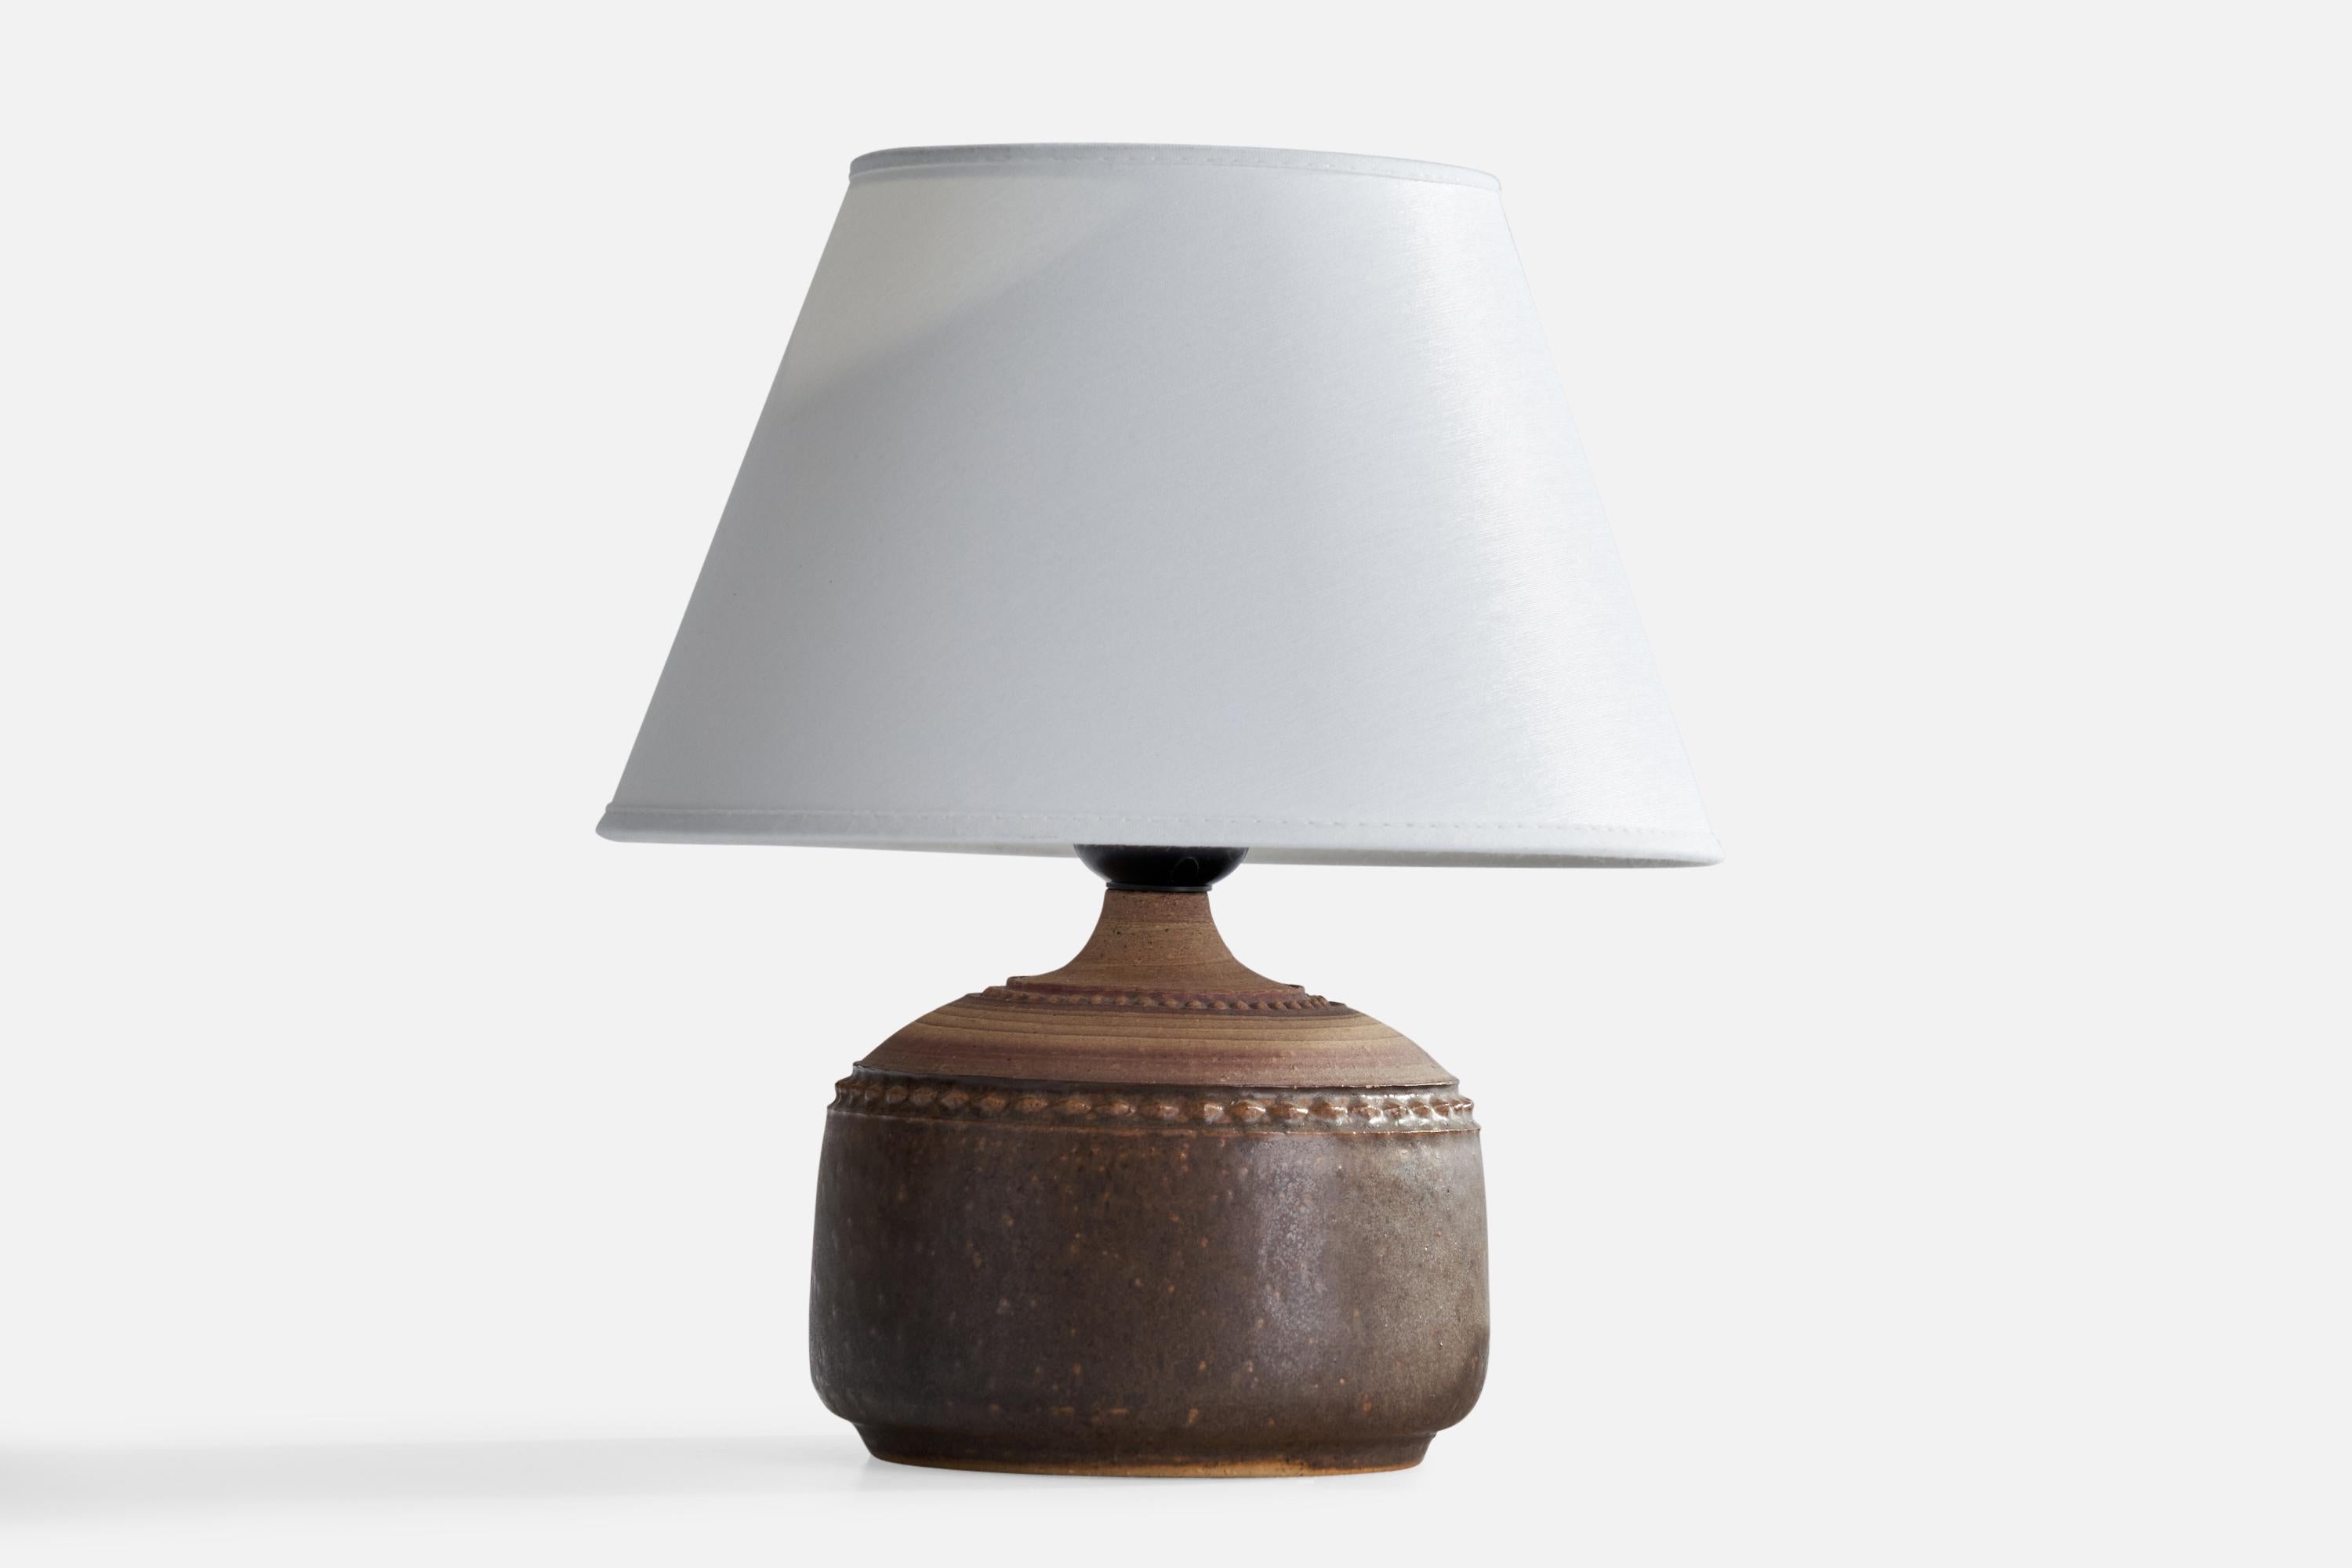 A brown-glazed stoneware table lamp designed and produced in Sweden, 1960s.

Dimensions of Lamp (inches): 6.5” H x 5.25” Diameter
Dimensions of Shade (inches): 4.75” Top Diameter x 8.25” Bottom Diameter x 5.25” H
Dimensions of Lamp with Shade